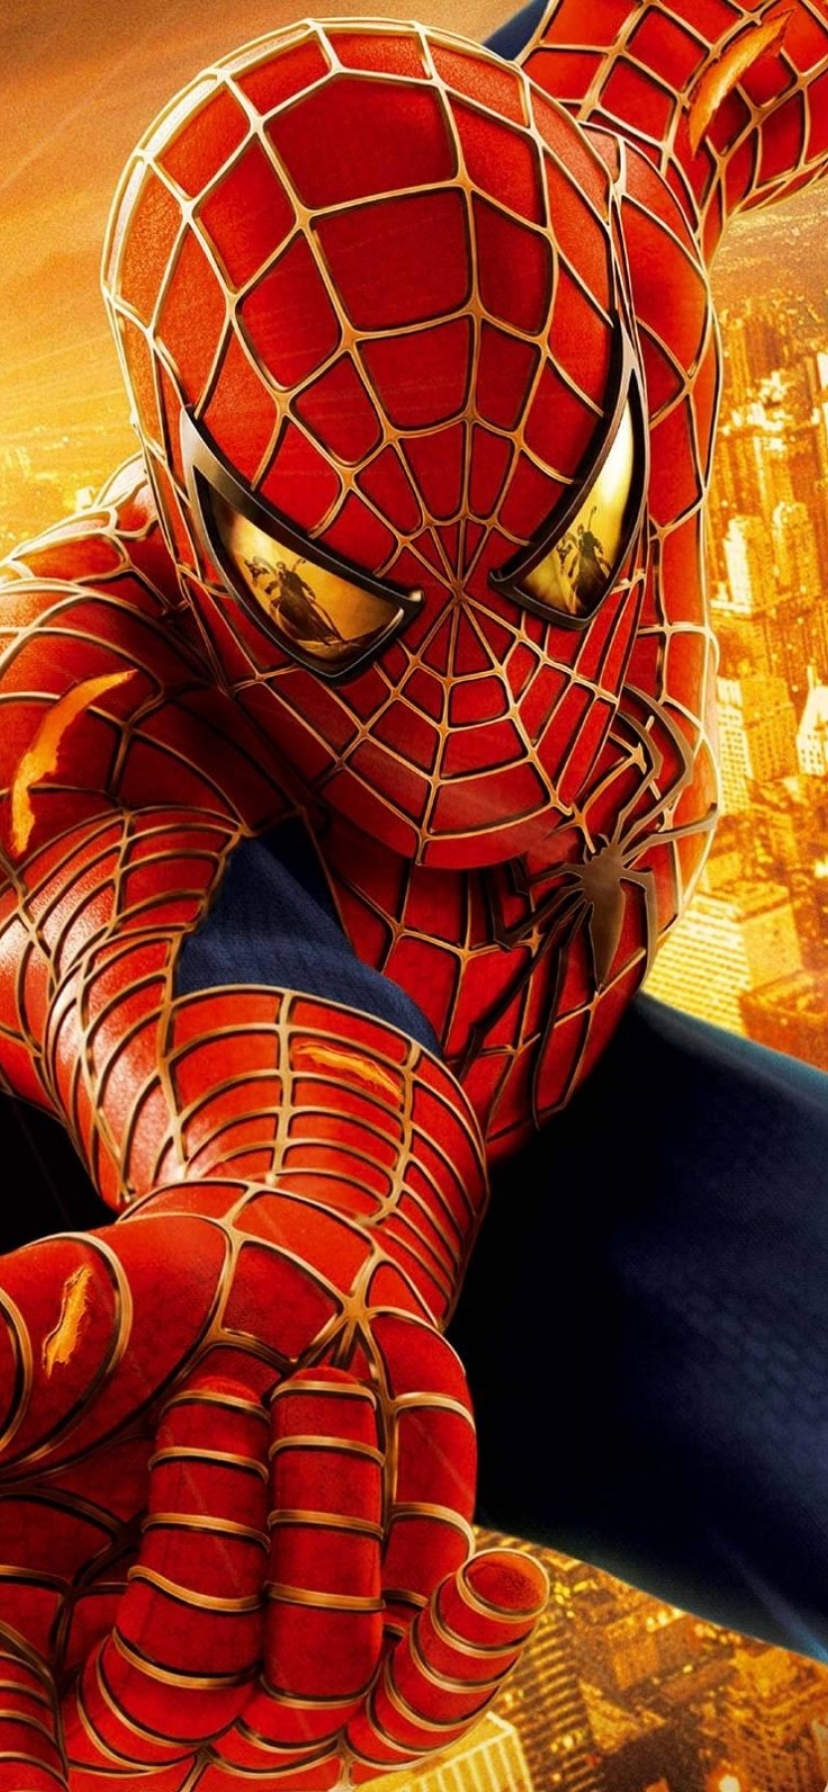 Spiderman Wallpapers and Backgrounds  WallpaperCG